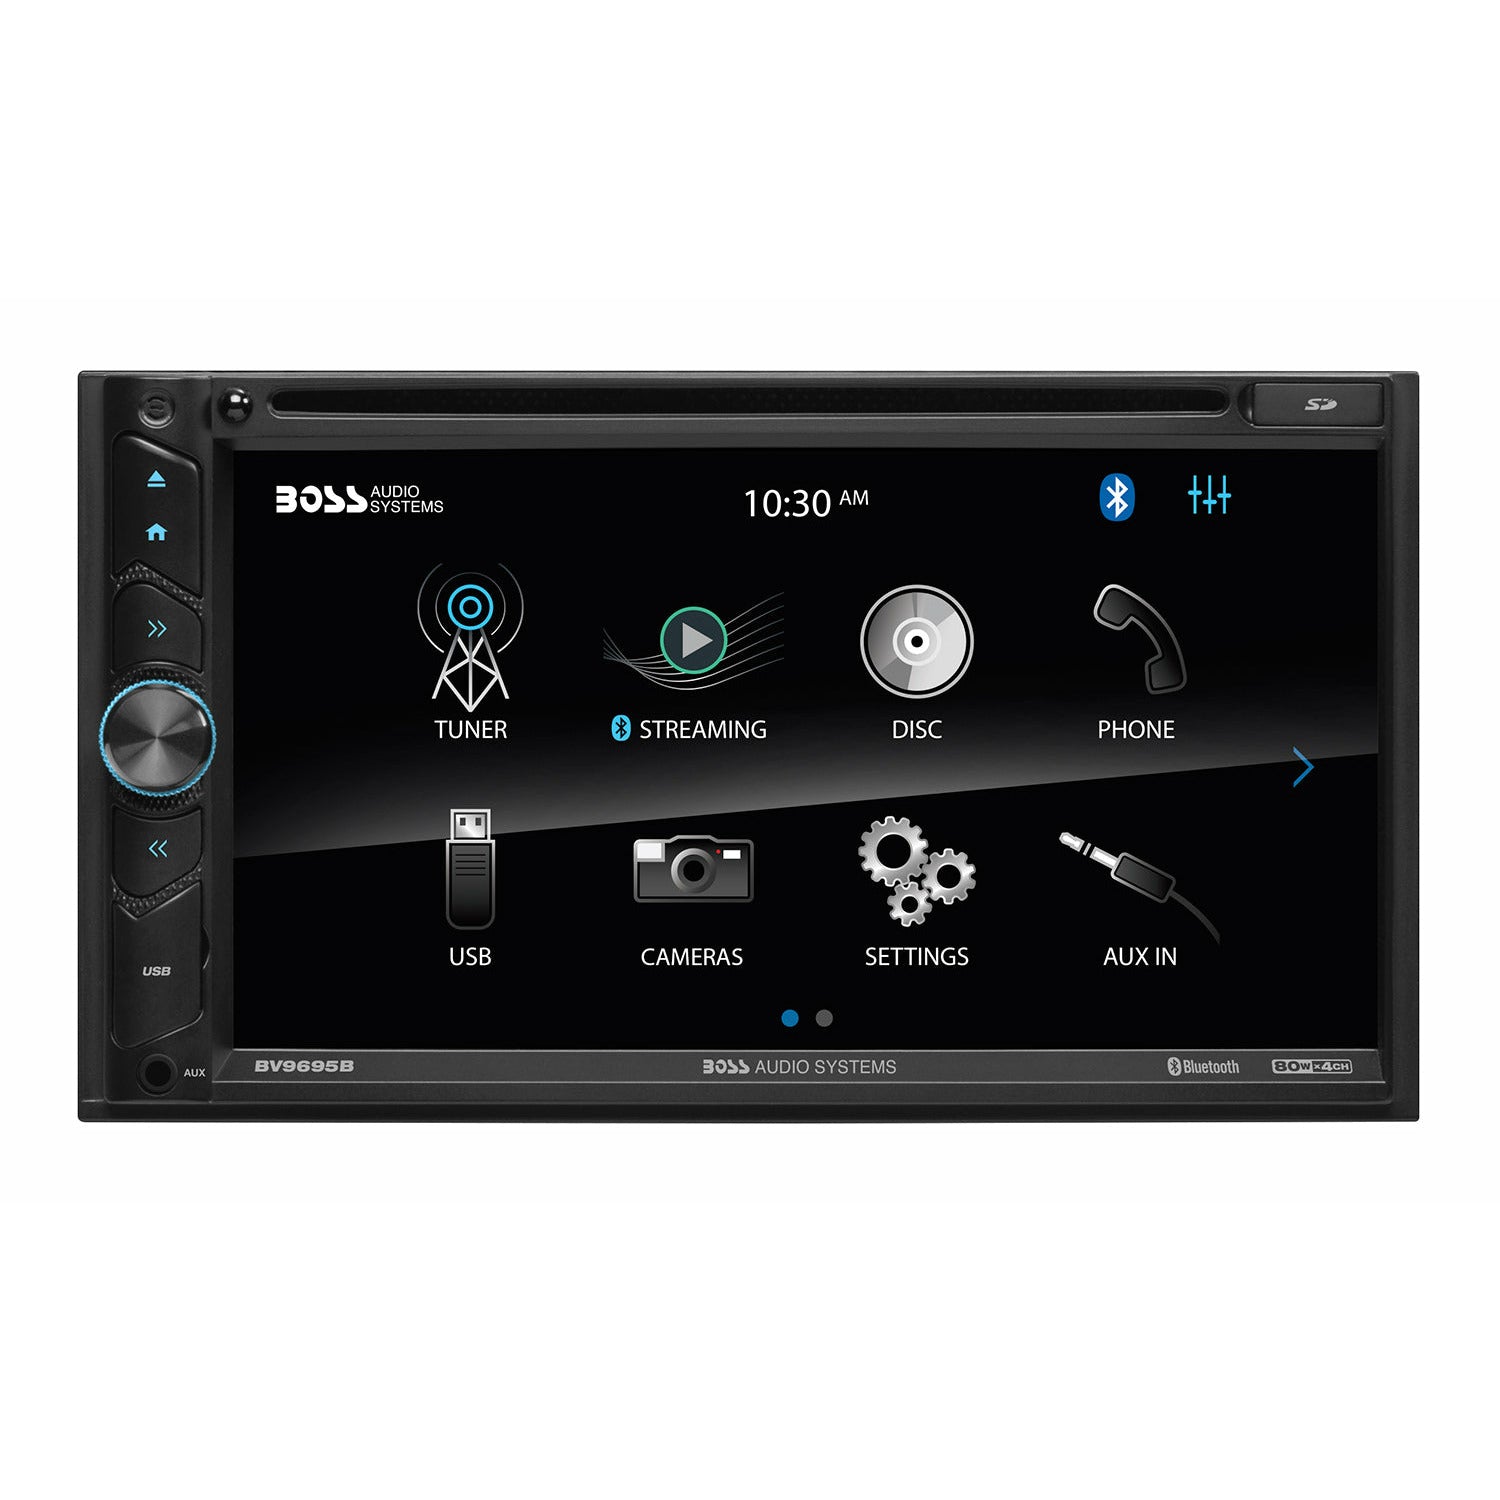 Boss BVB9695RC 6.95" Double-Din Head Unit Digital Media Receiver Mech-Less Player With Bluetooth + Top License Plate Backup Camera